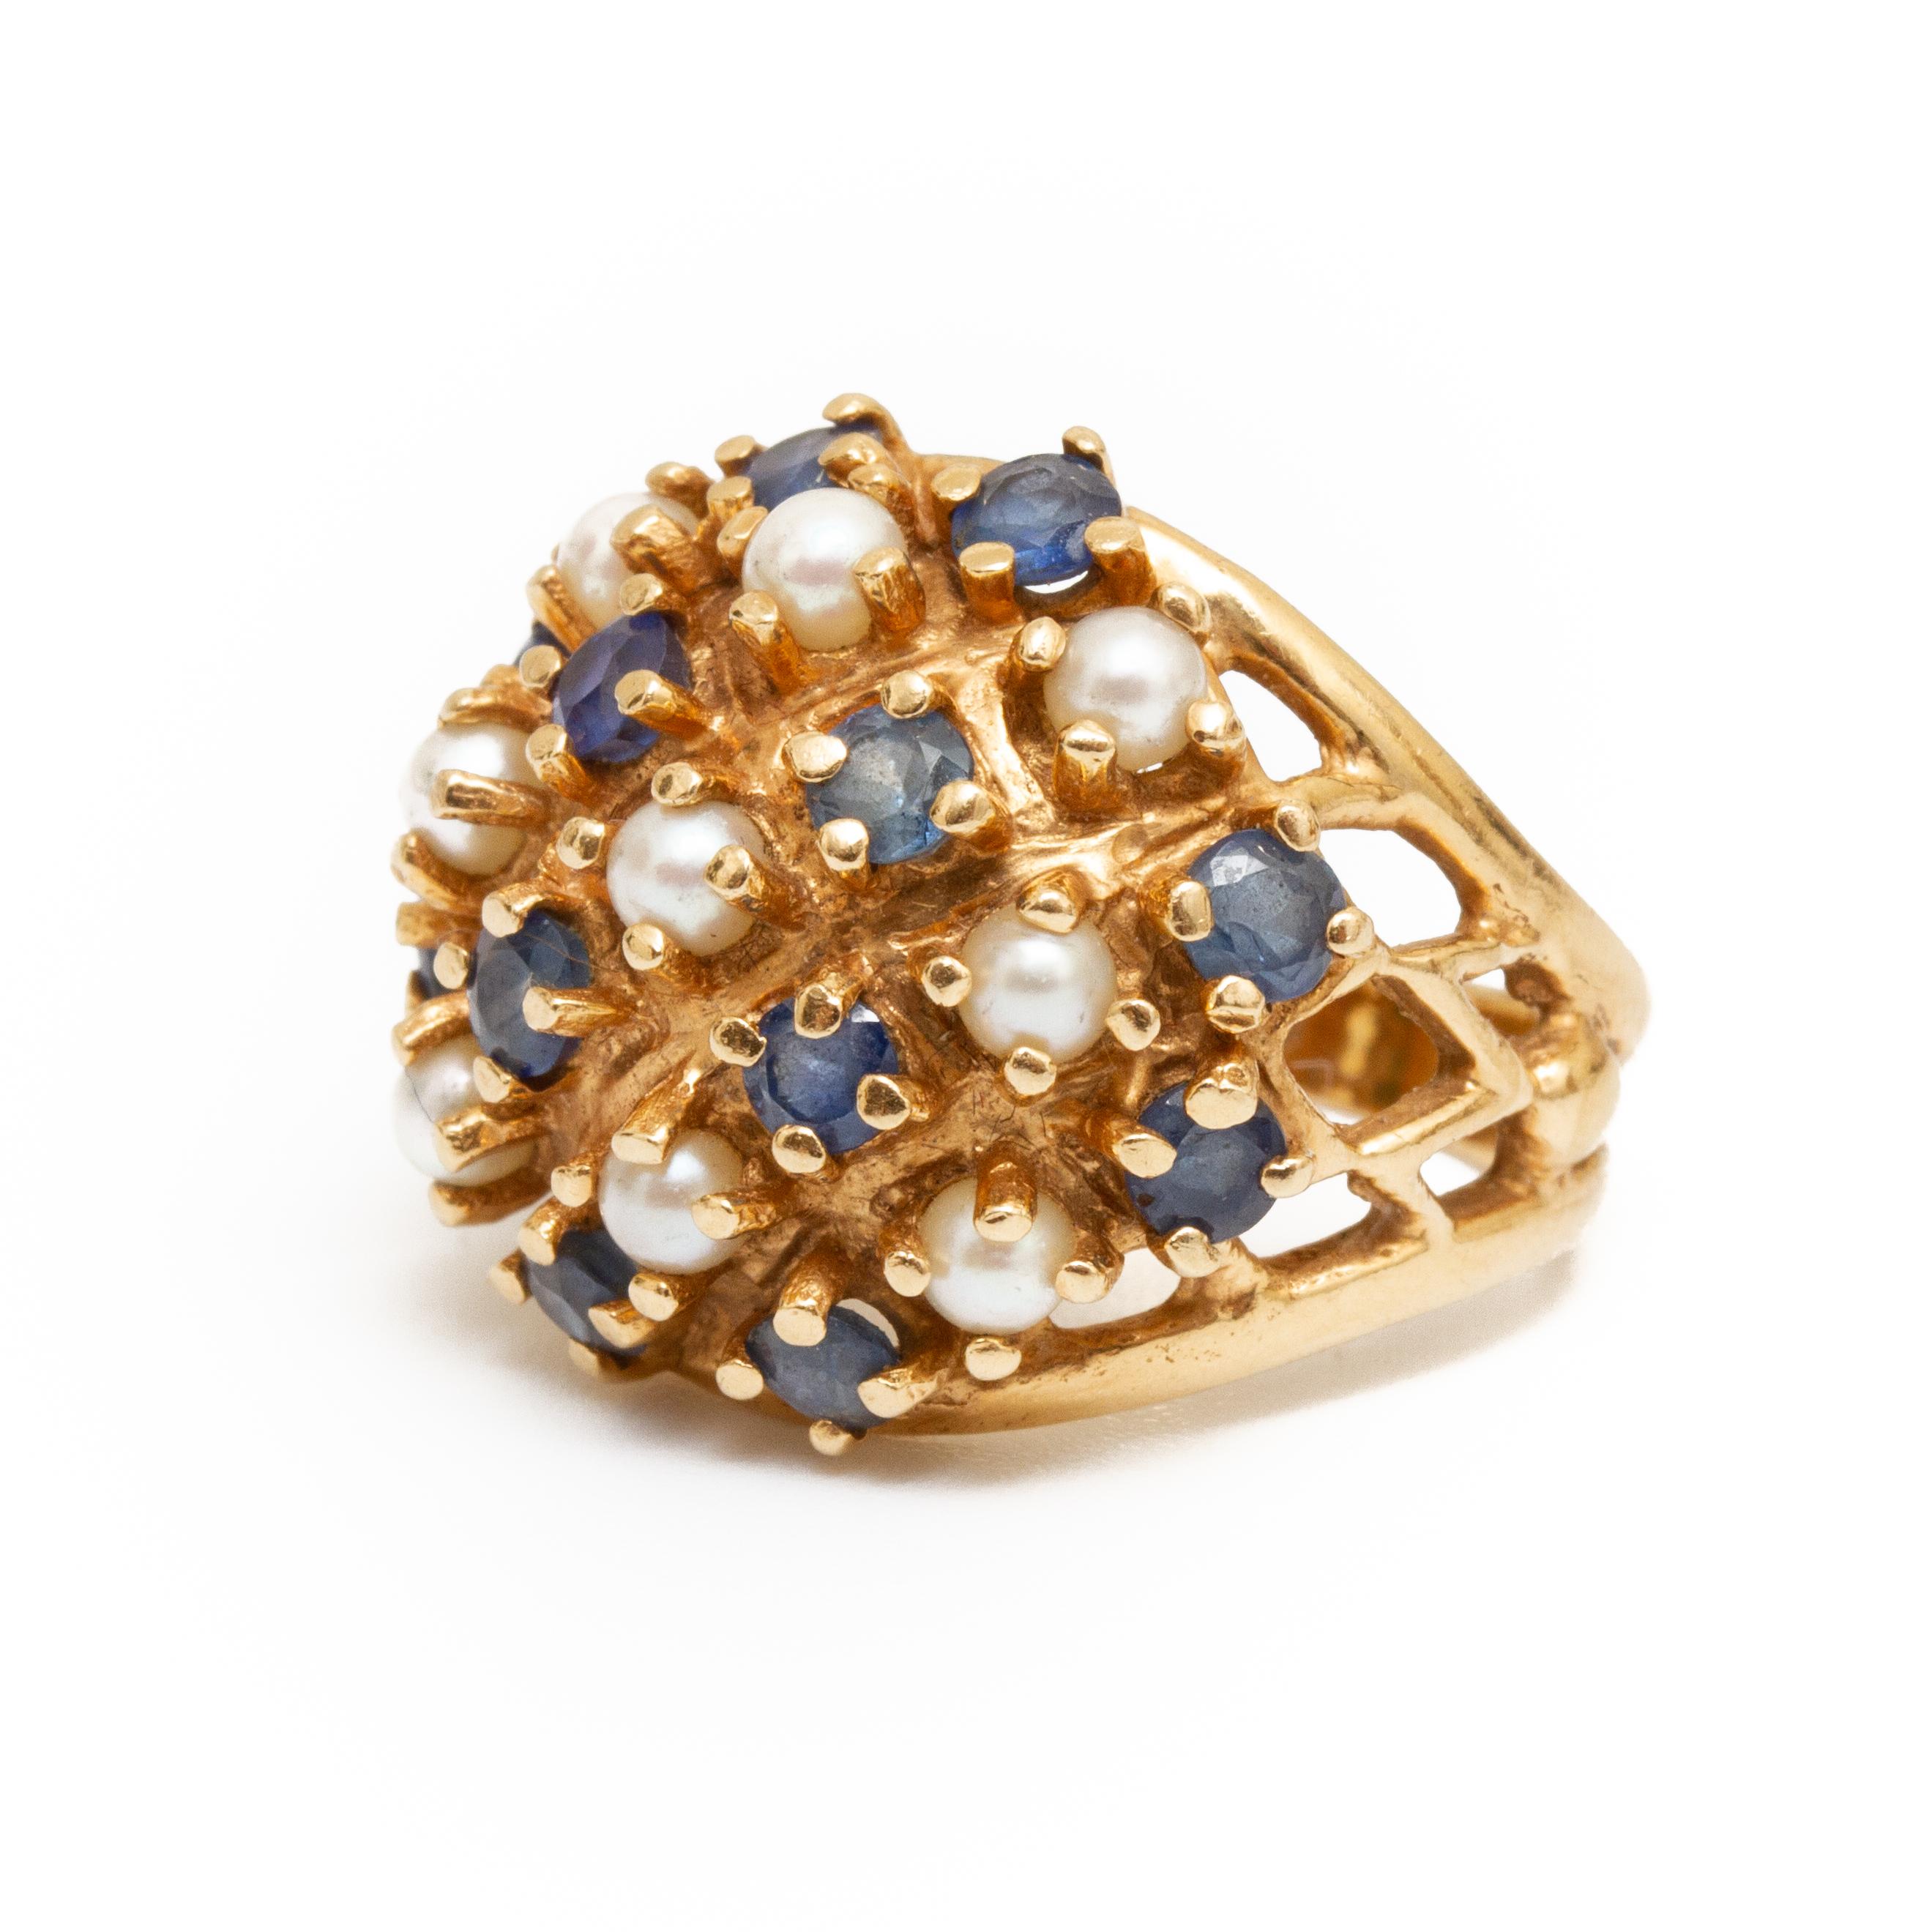 Mixed Cut 14k Gold, Sapphire and Seed Pearl Ring